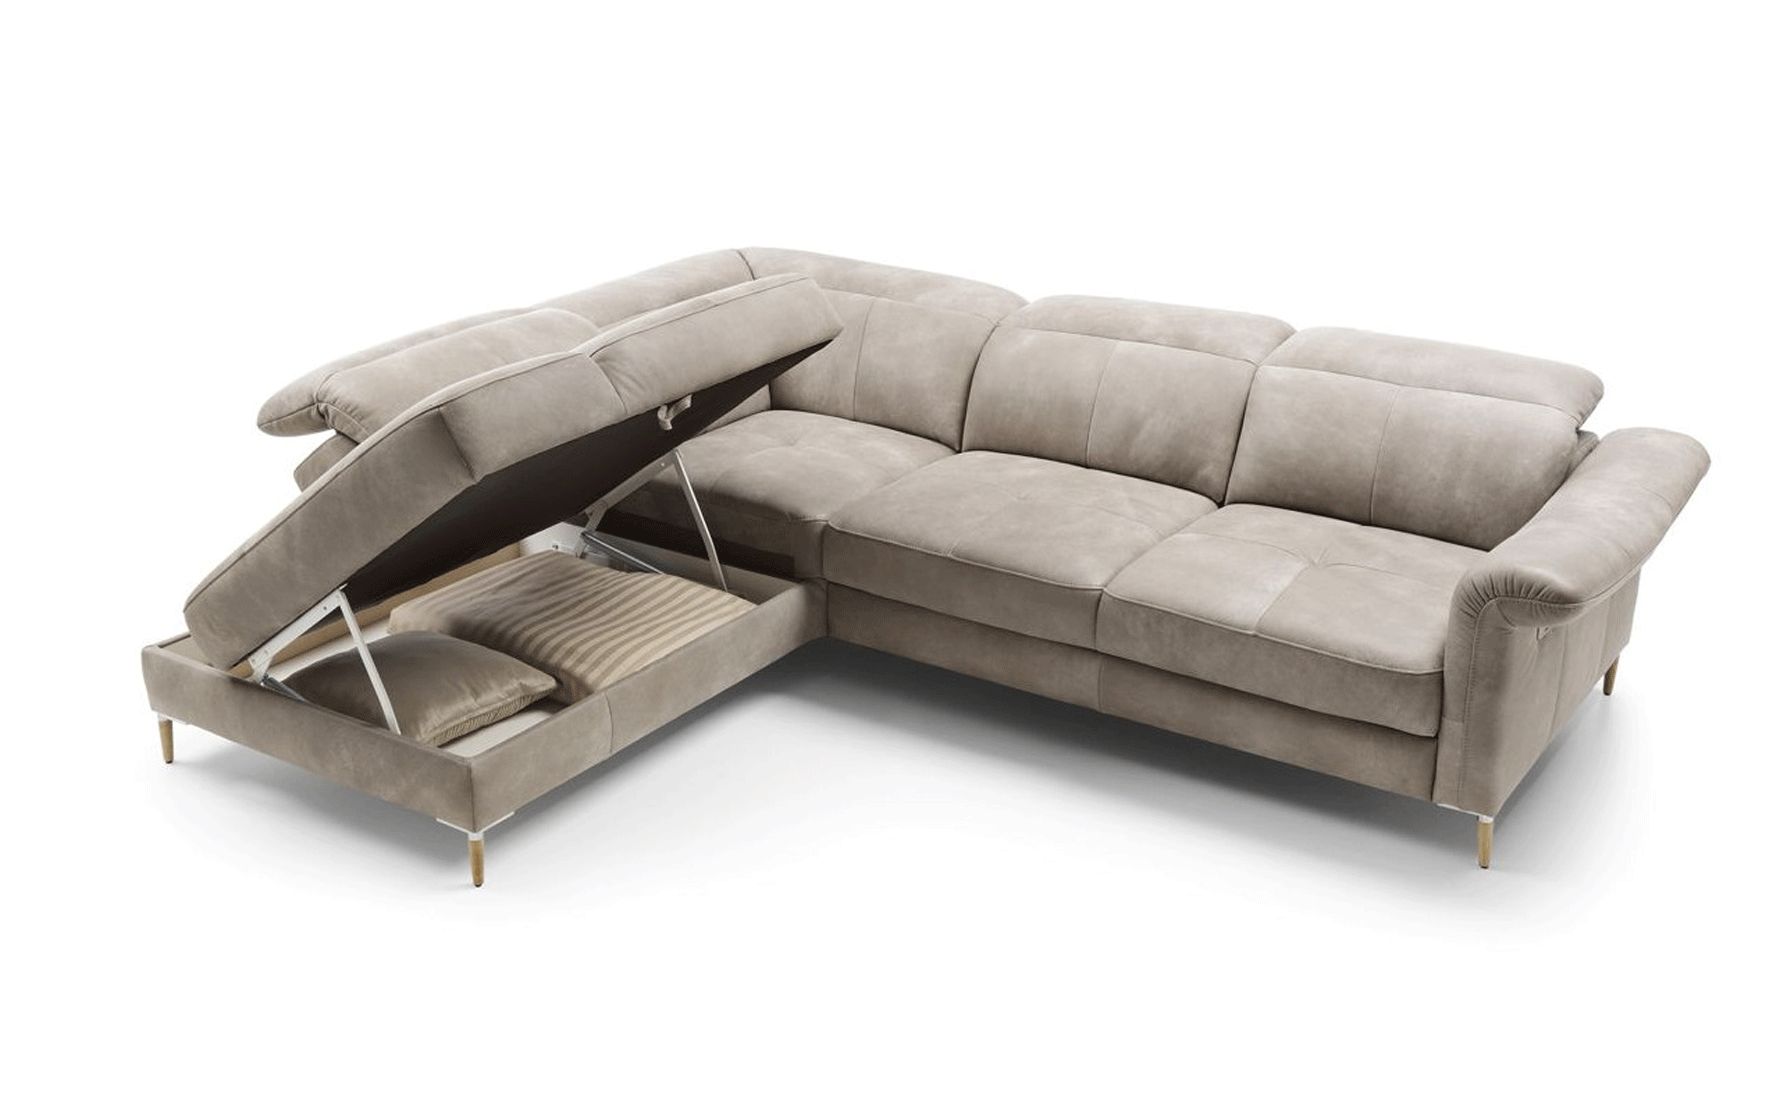 Exotic Slipcovered Sectional Sofa Bed - Click Image to Close